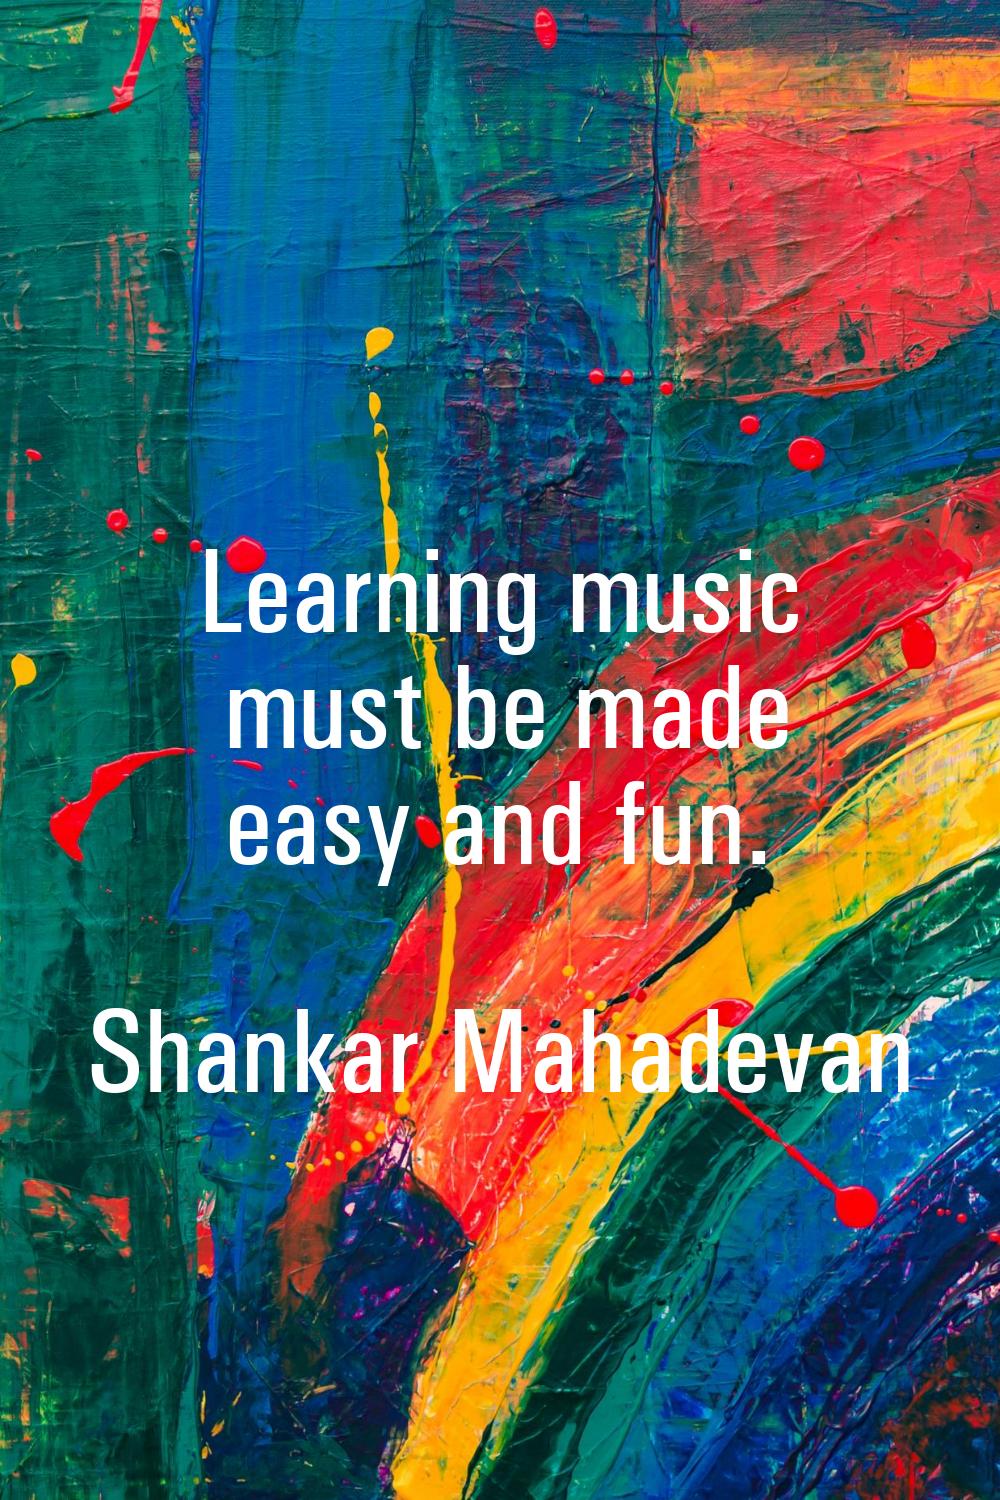 Learning music must be made easy and fun.